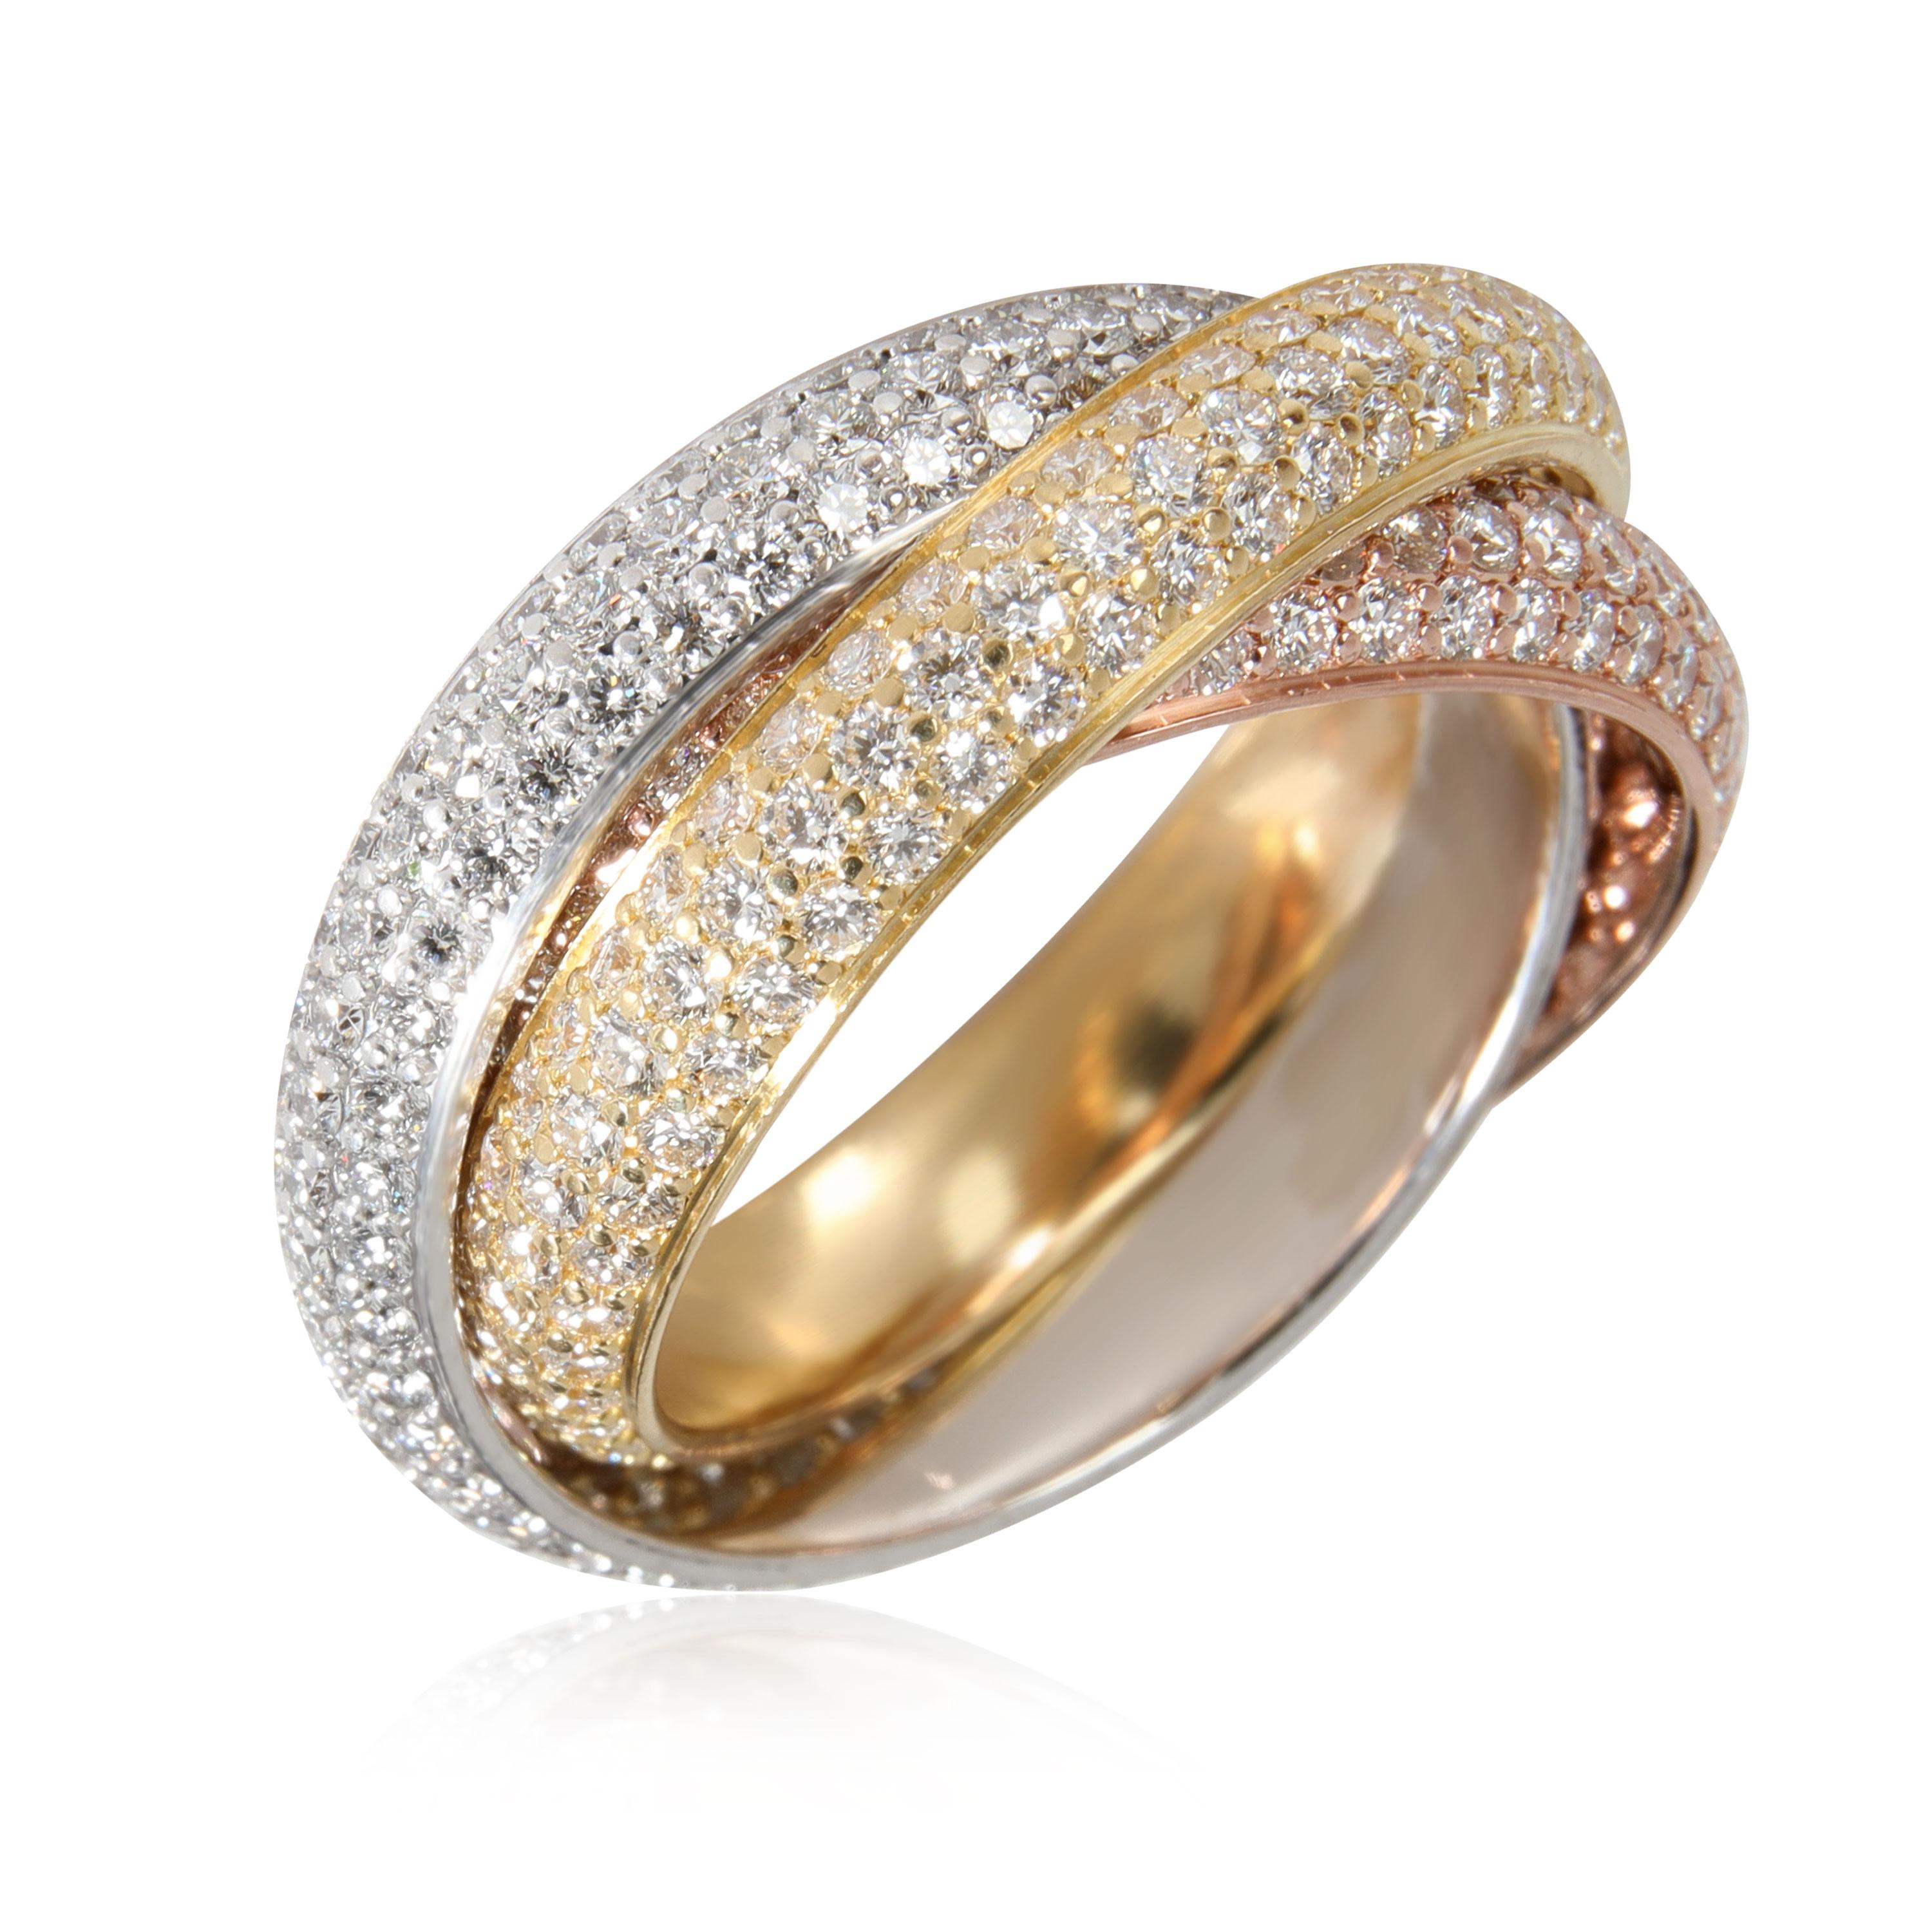 
Cartier Trinity Pave Diamond Ring in 18k 3 Tone Gold 2.98 CTW

PRIMARY DETAILS
SKU: 112630
Listing Title: Cartier Trinity Pave Diamond Ring in 18k 3 Tone Gold 2.98 CTW
Condition Description: Retails for 35,800 USD. In excellent condition and